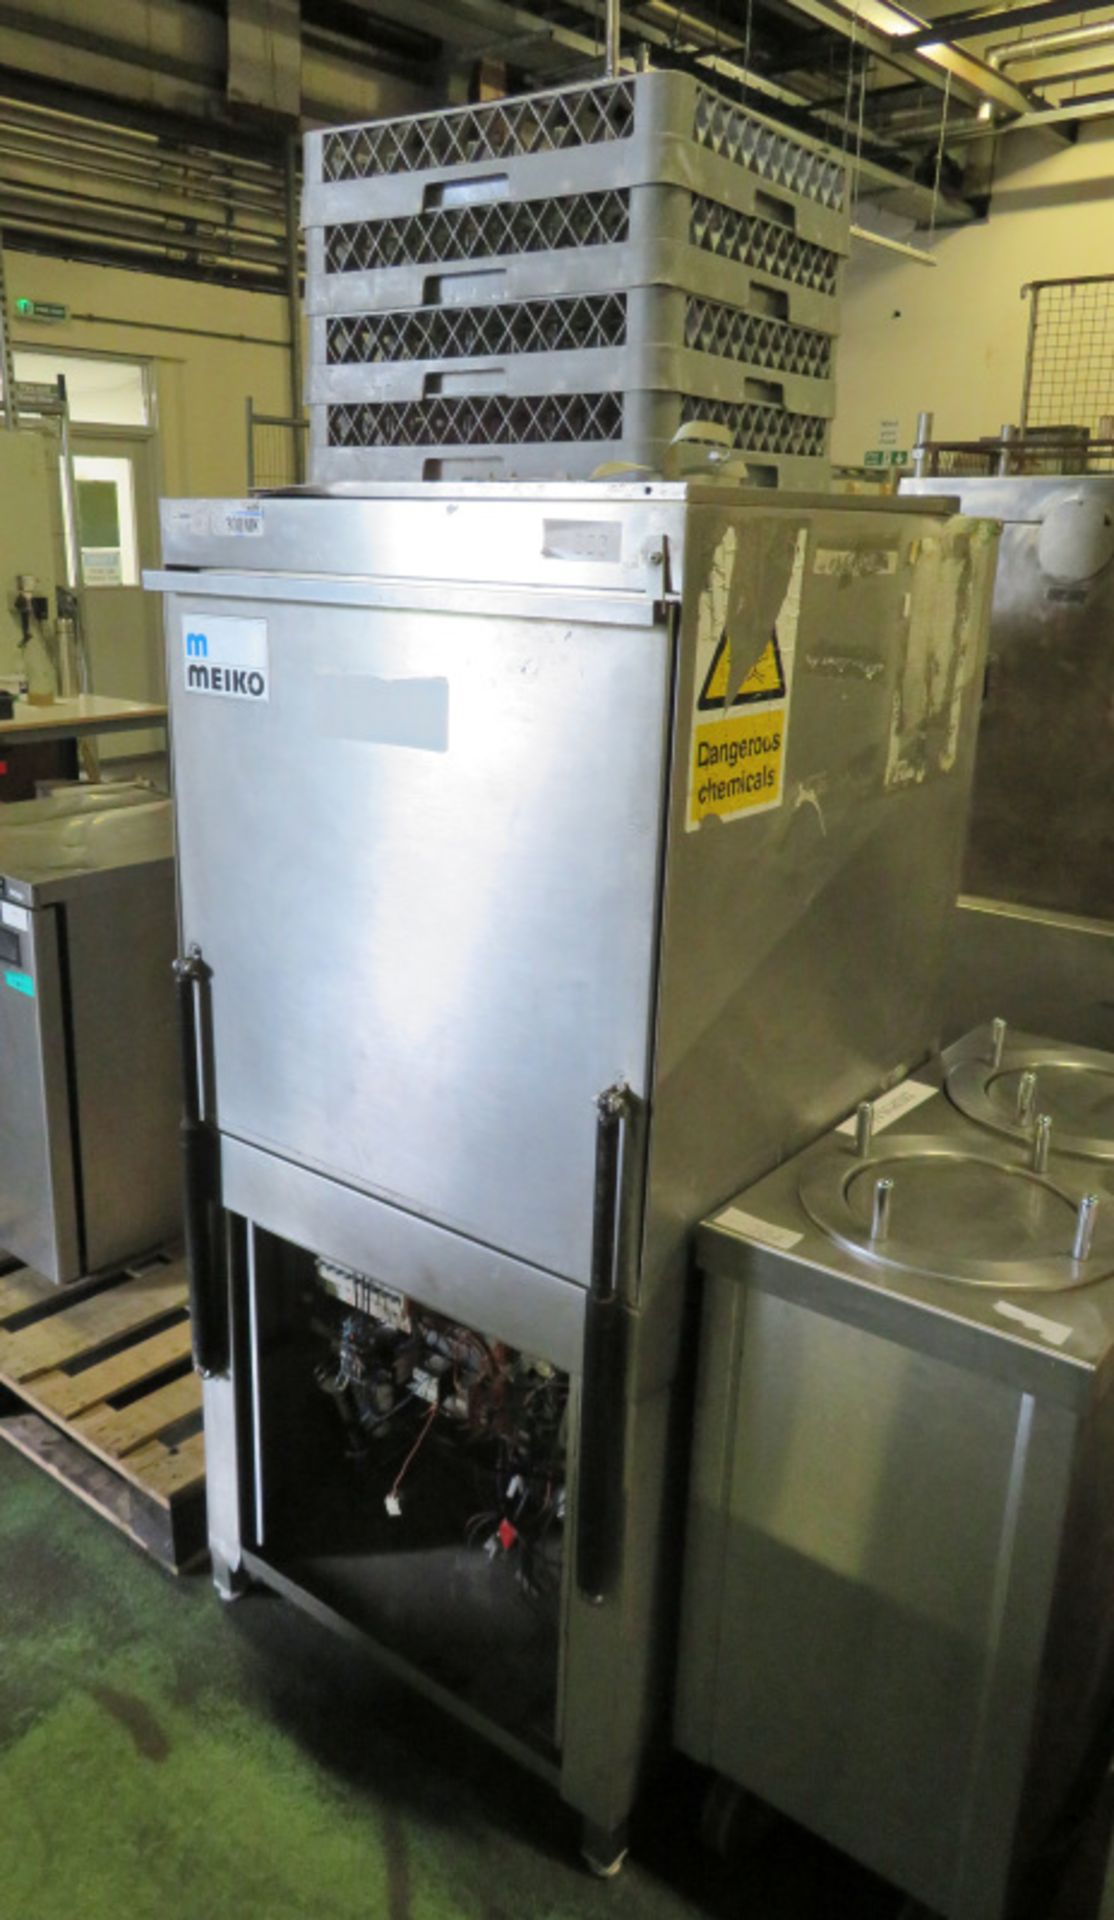 Meiko FV130B FA Dishwasher 14kw 400v L 740mm x W 800mm x H 1600mm - Image 2 of 6